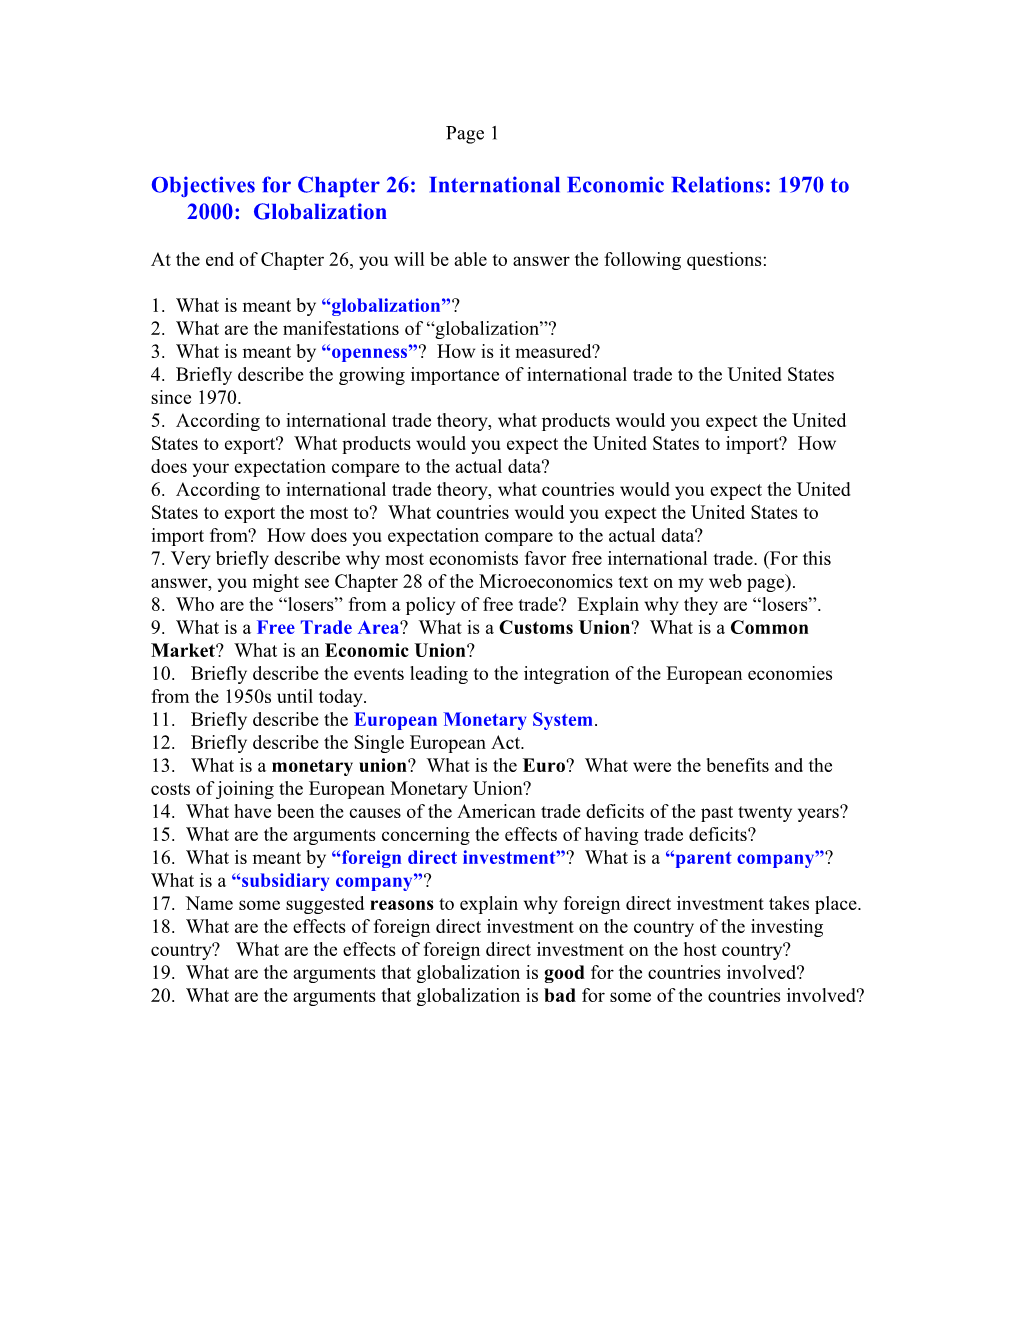 Objectives for Chapter 26: International Economic Relations: 1970 to 2000: Globalization